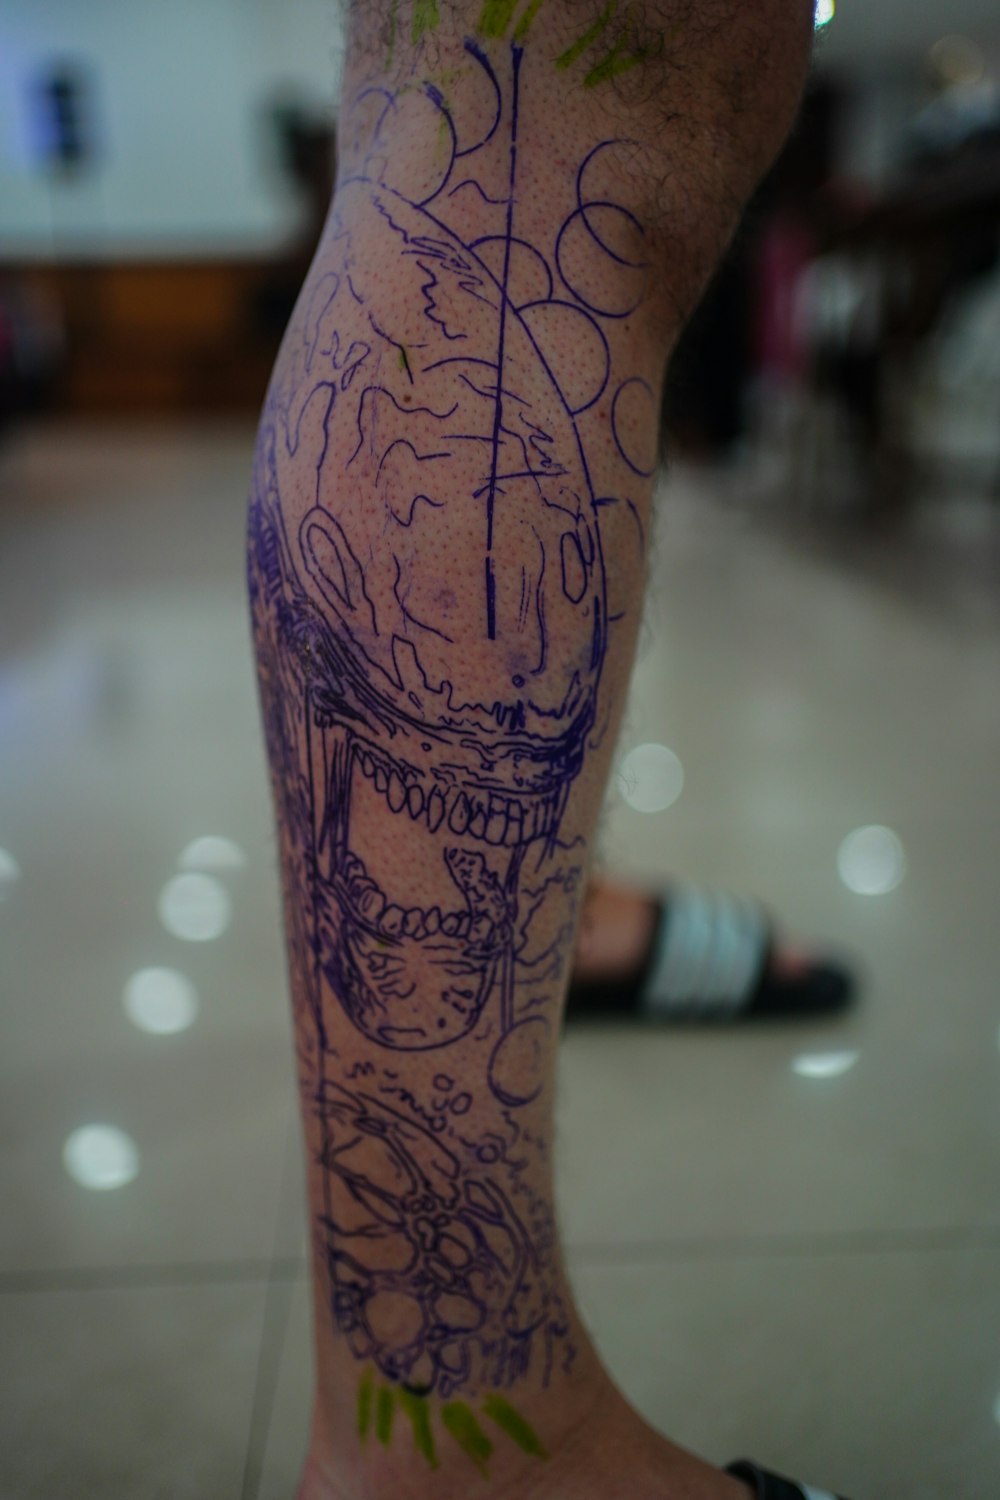 a person with a tattoo on their leg